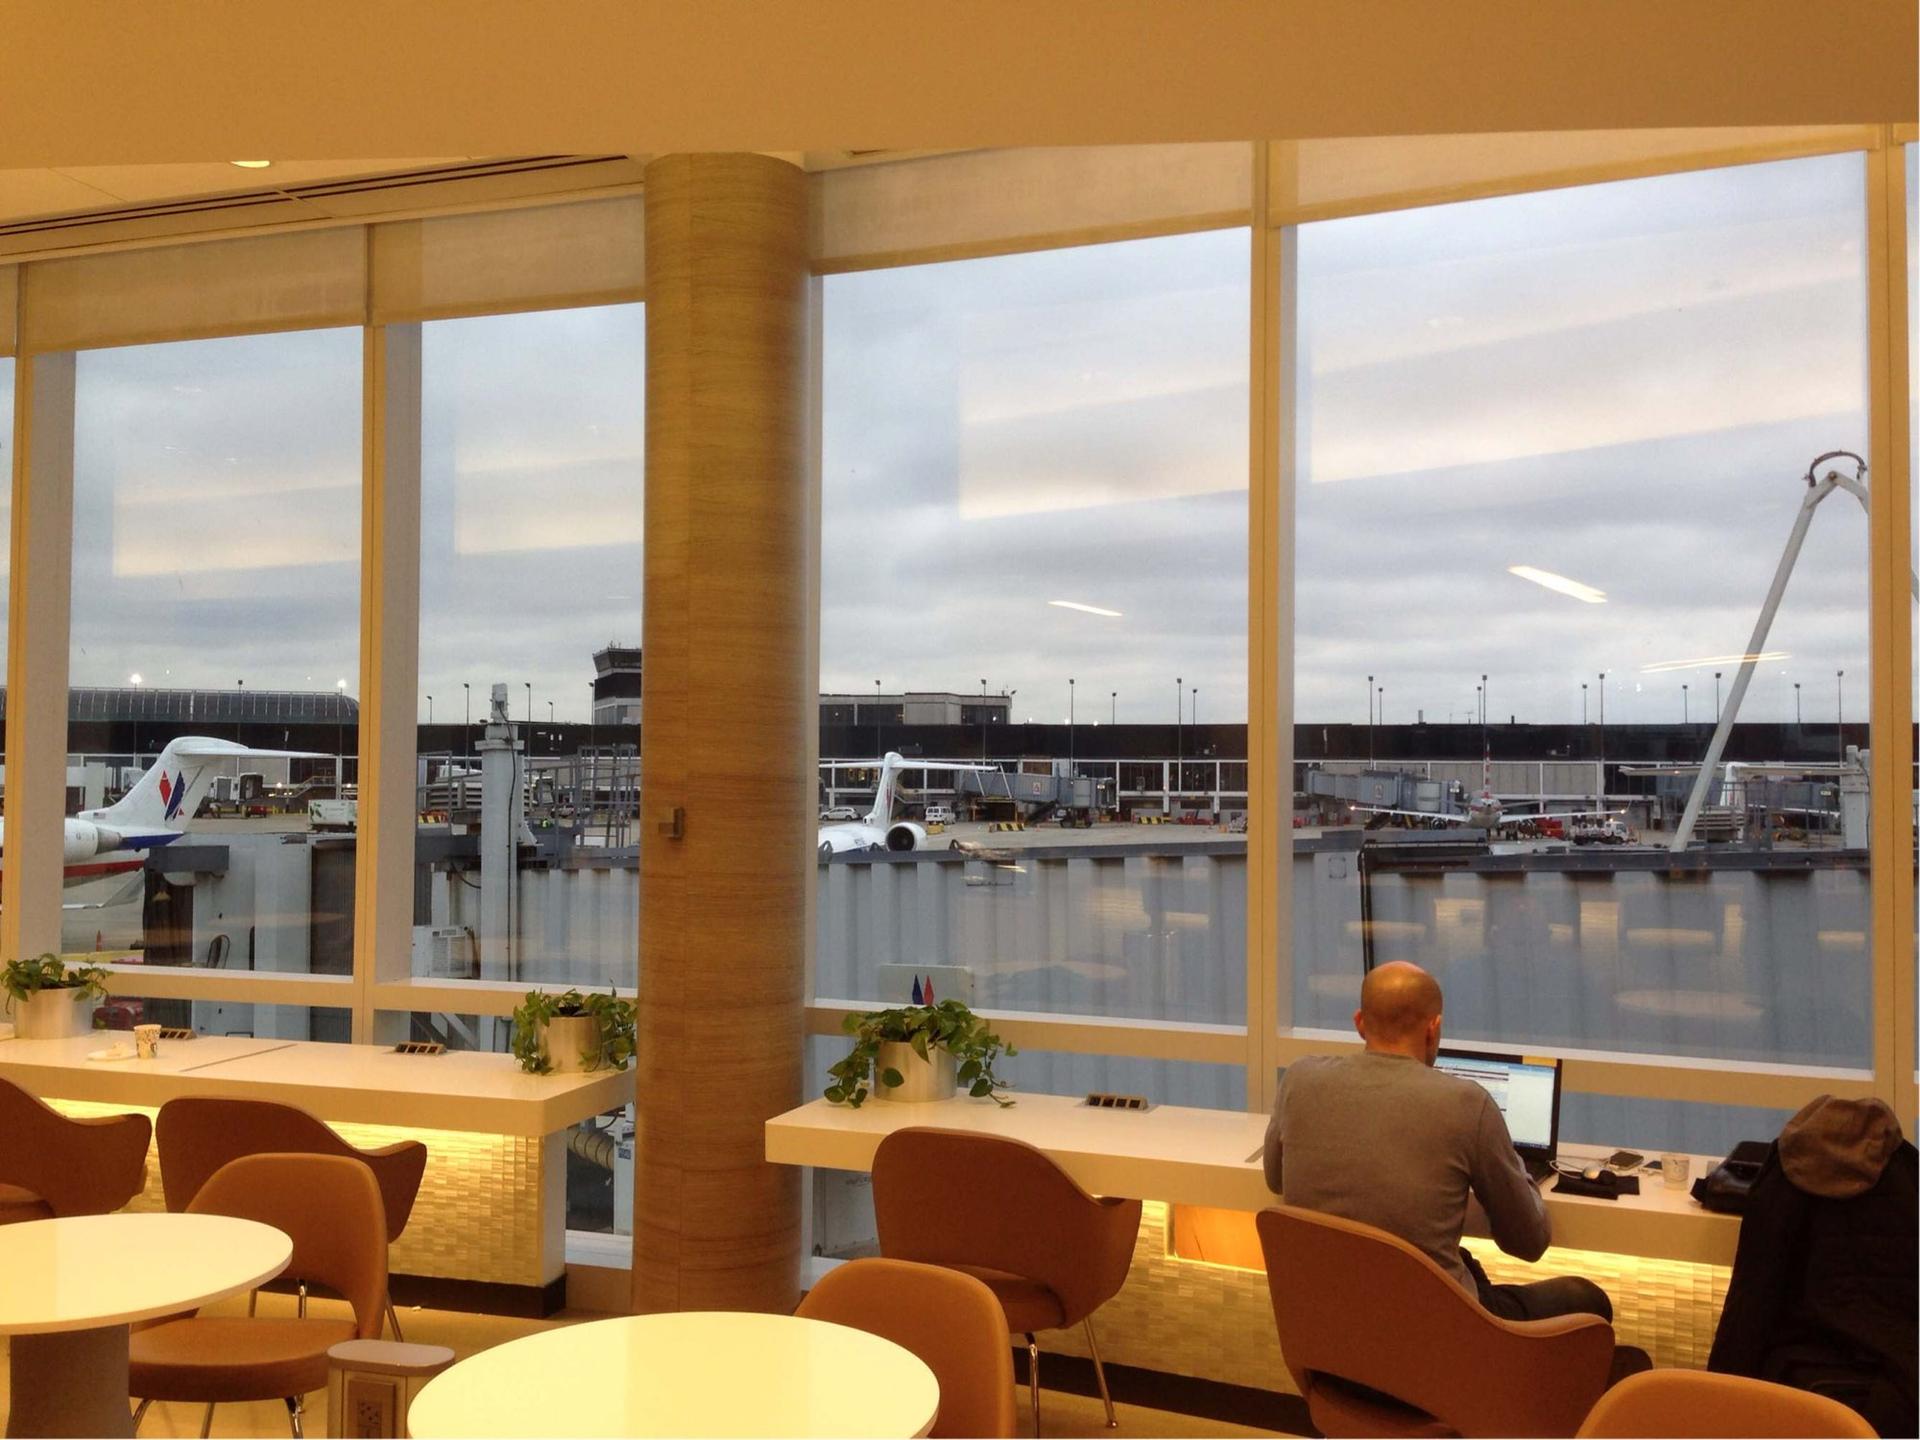 American Airlines Admirals Club image 21 of 50